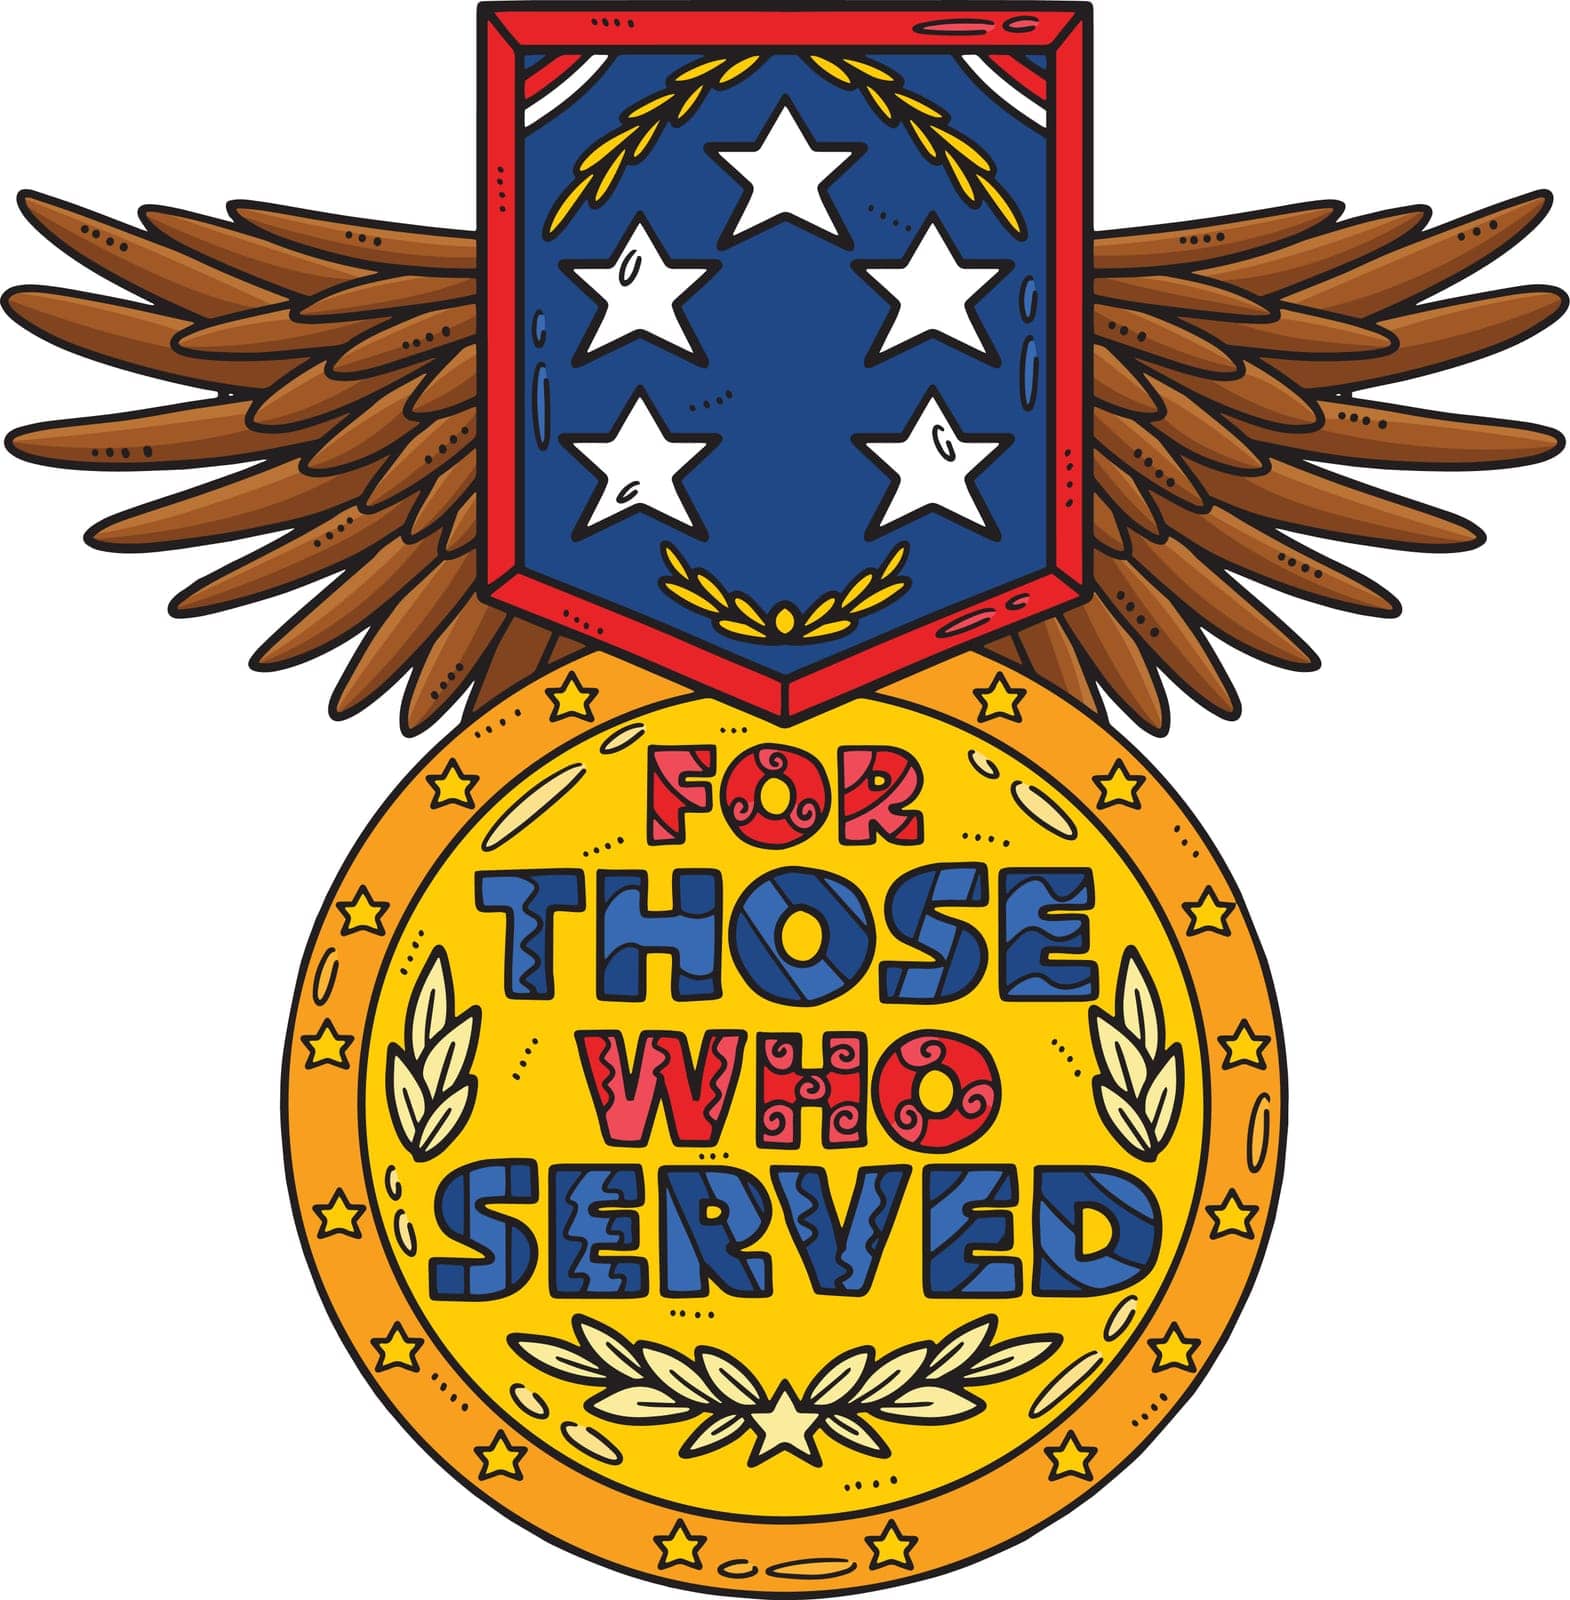 For Those Who Served Medal Wings Cartoon Clipart by abbydesign